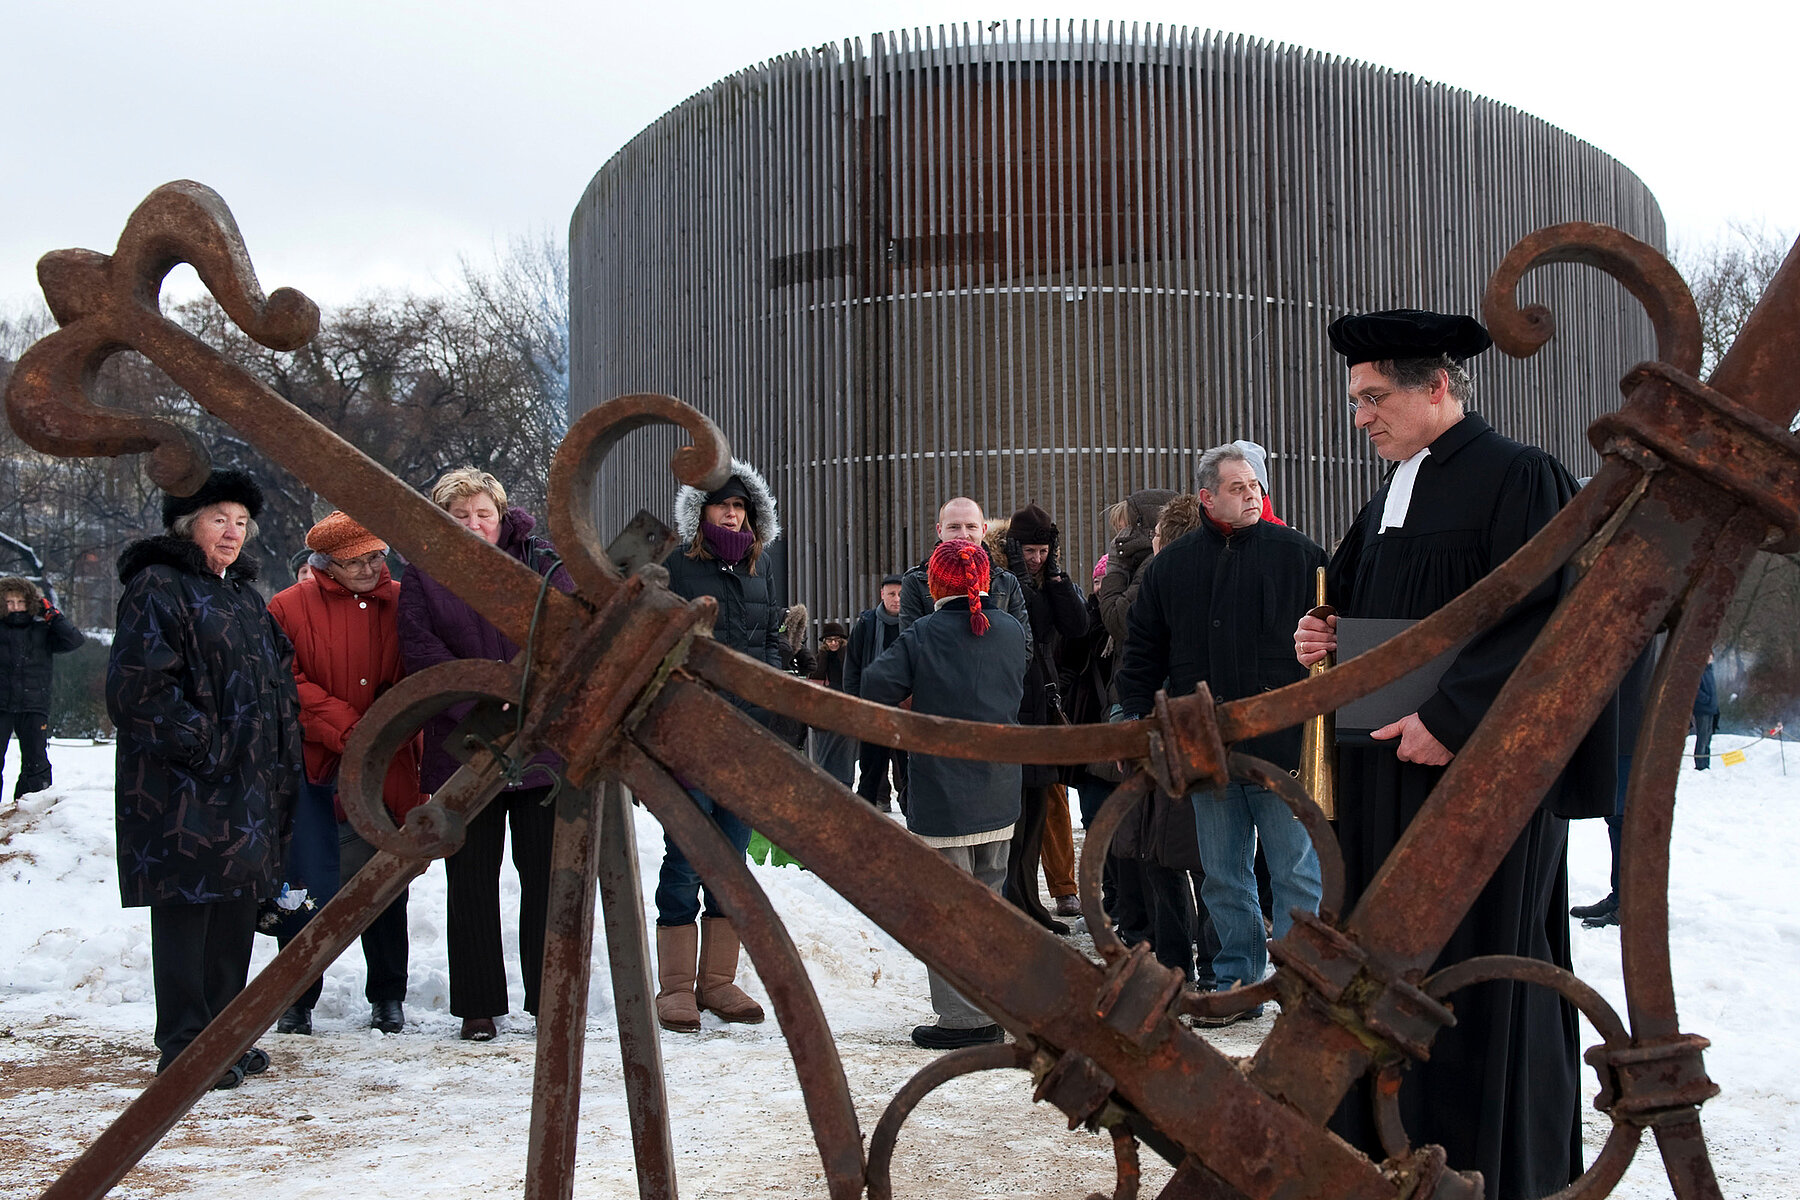 The Chapel of Reconciliation on the grounds of the Berlin Wall Memorial in winter. In front of it, Pastor Manfred Fischer stands with a few other people in the foreground the rusty original cross of the blown-up Church of Reconciliation.